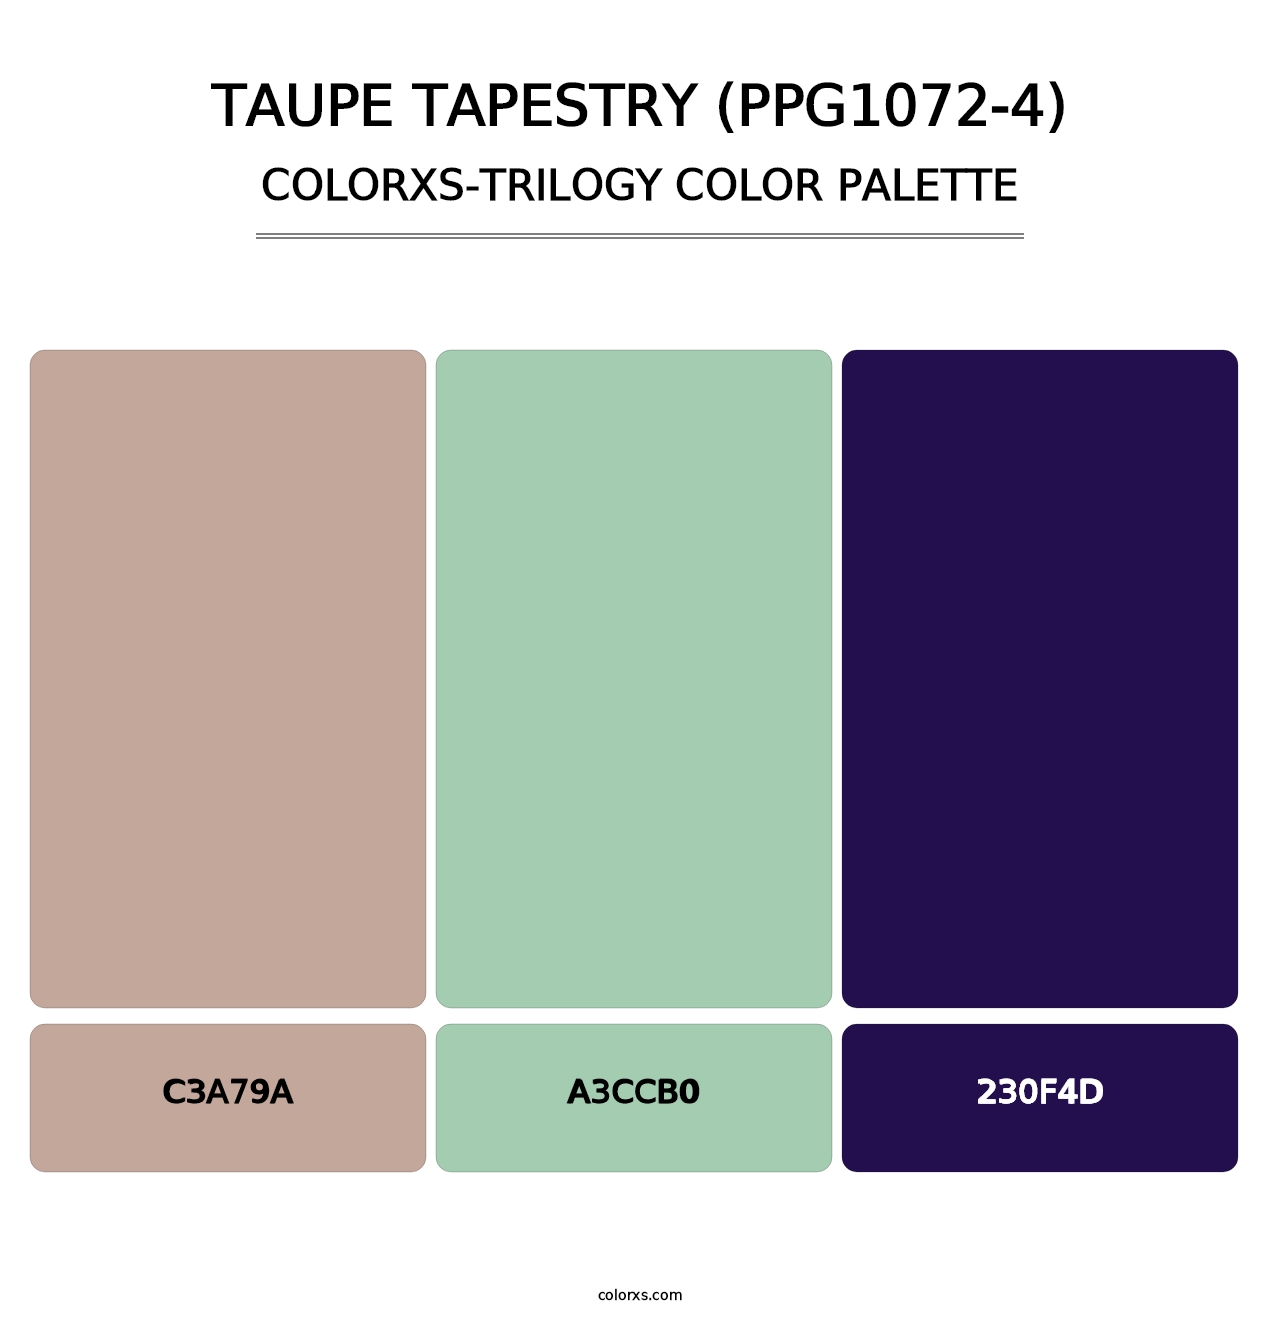 Taupe Tapestry (PPG1072-4) - Colorxs Trilogy Palette